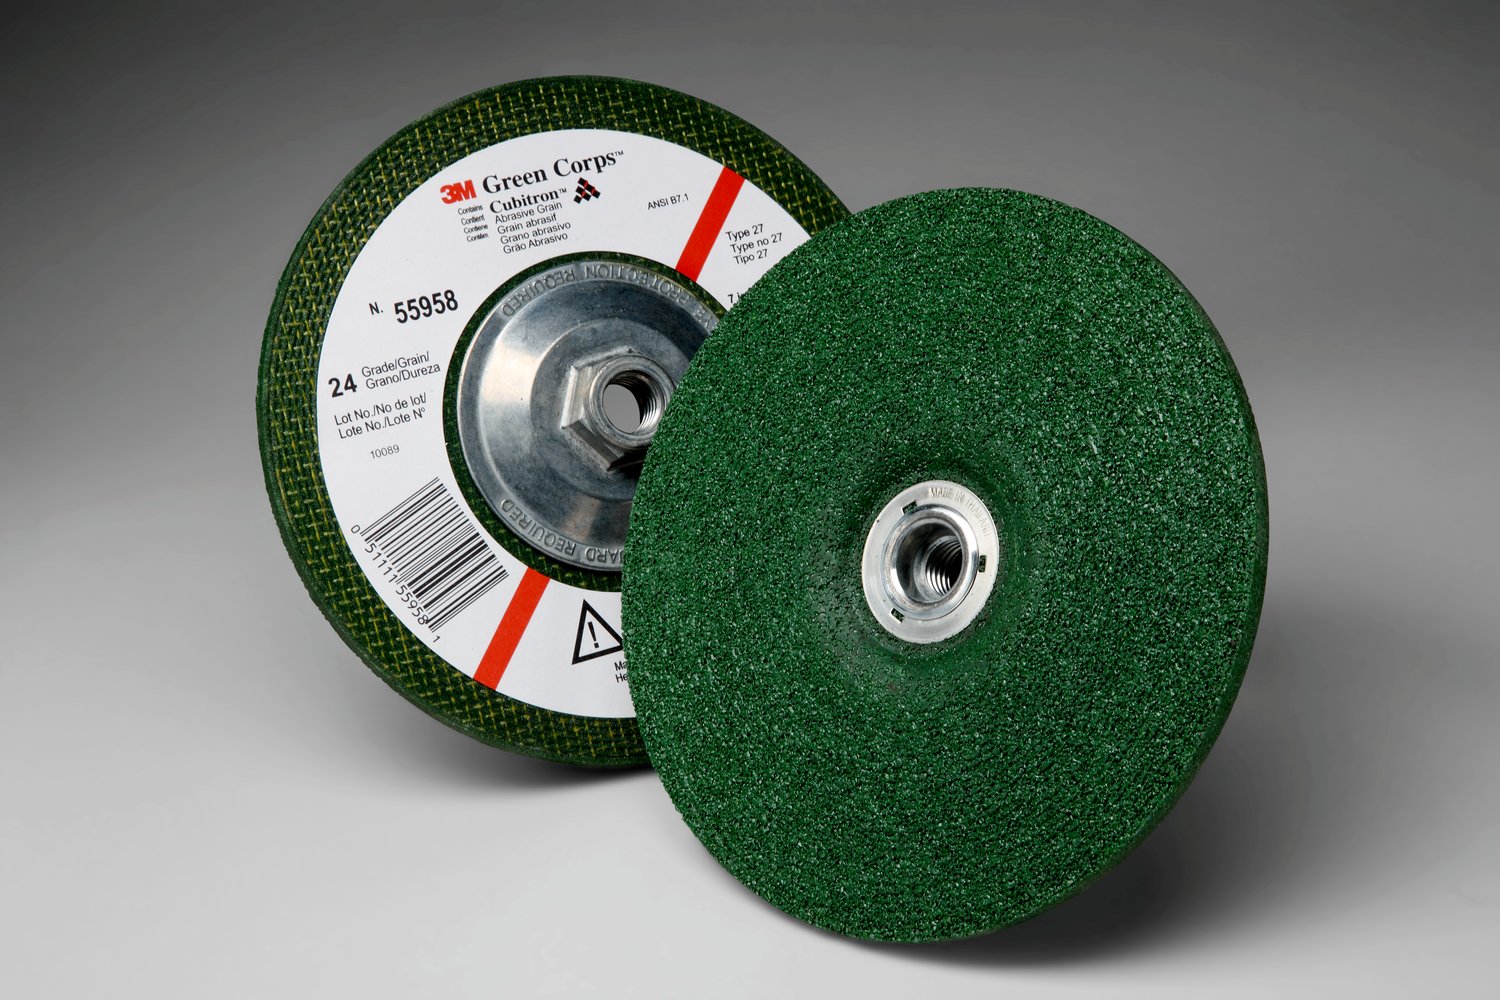 00051111559581, 3M Green Corps Depressed Center Wheel, 24, 7 in x 1/4 in x  5/8 in-11 Internal, 10/Carton, 20 ea/Case, Aircraft product, Cutoff--Grinding-Wheels